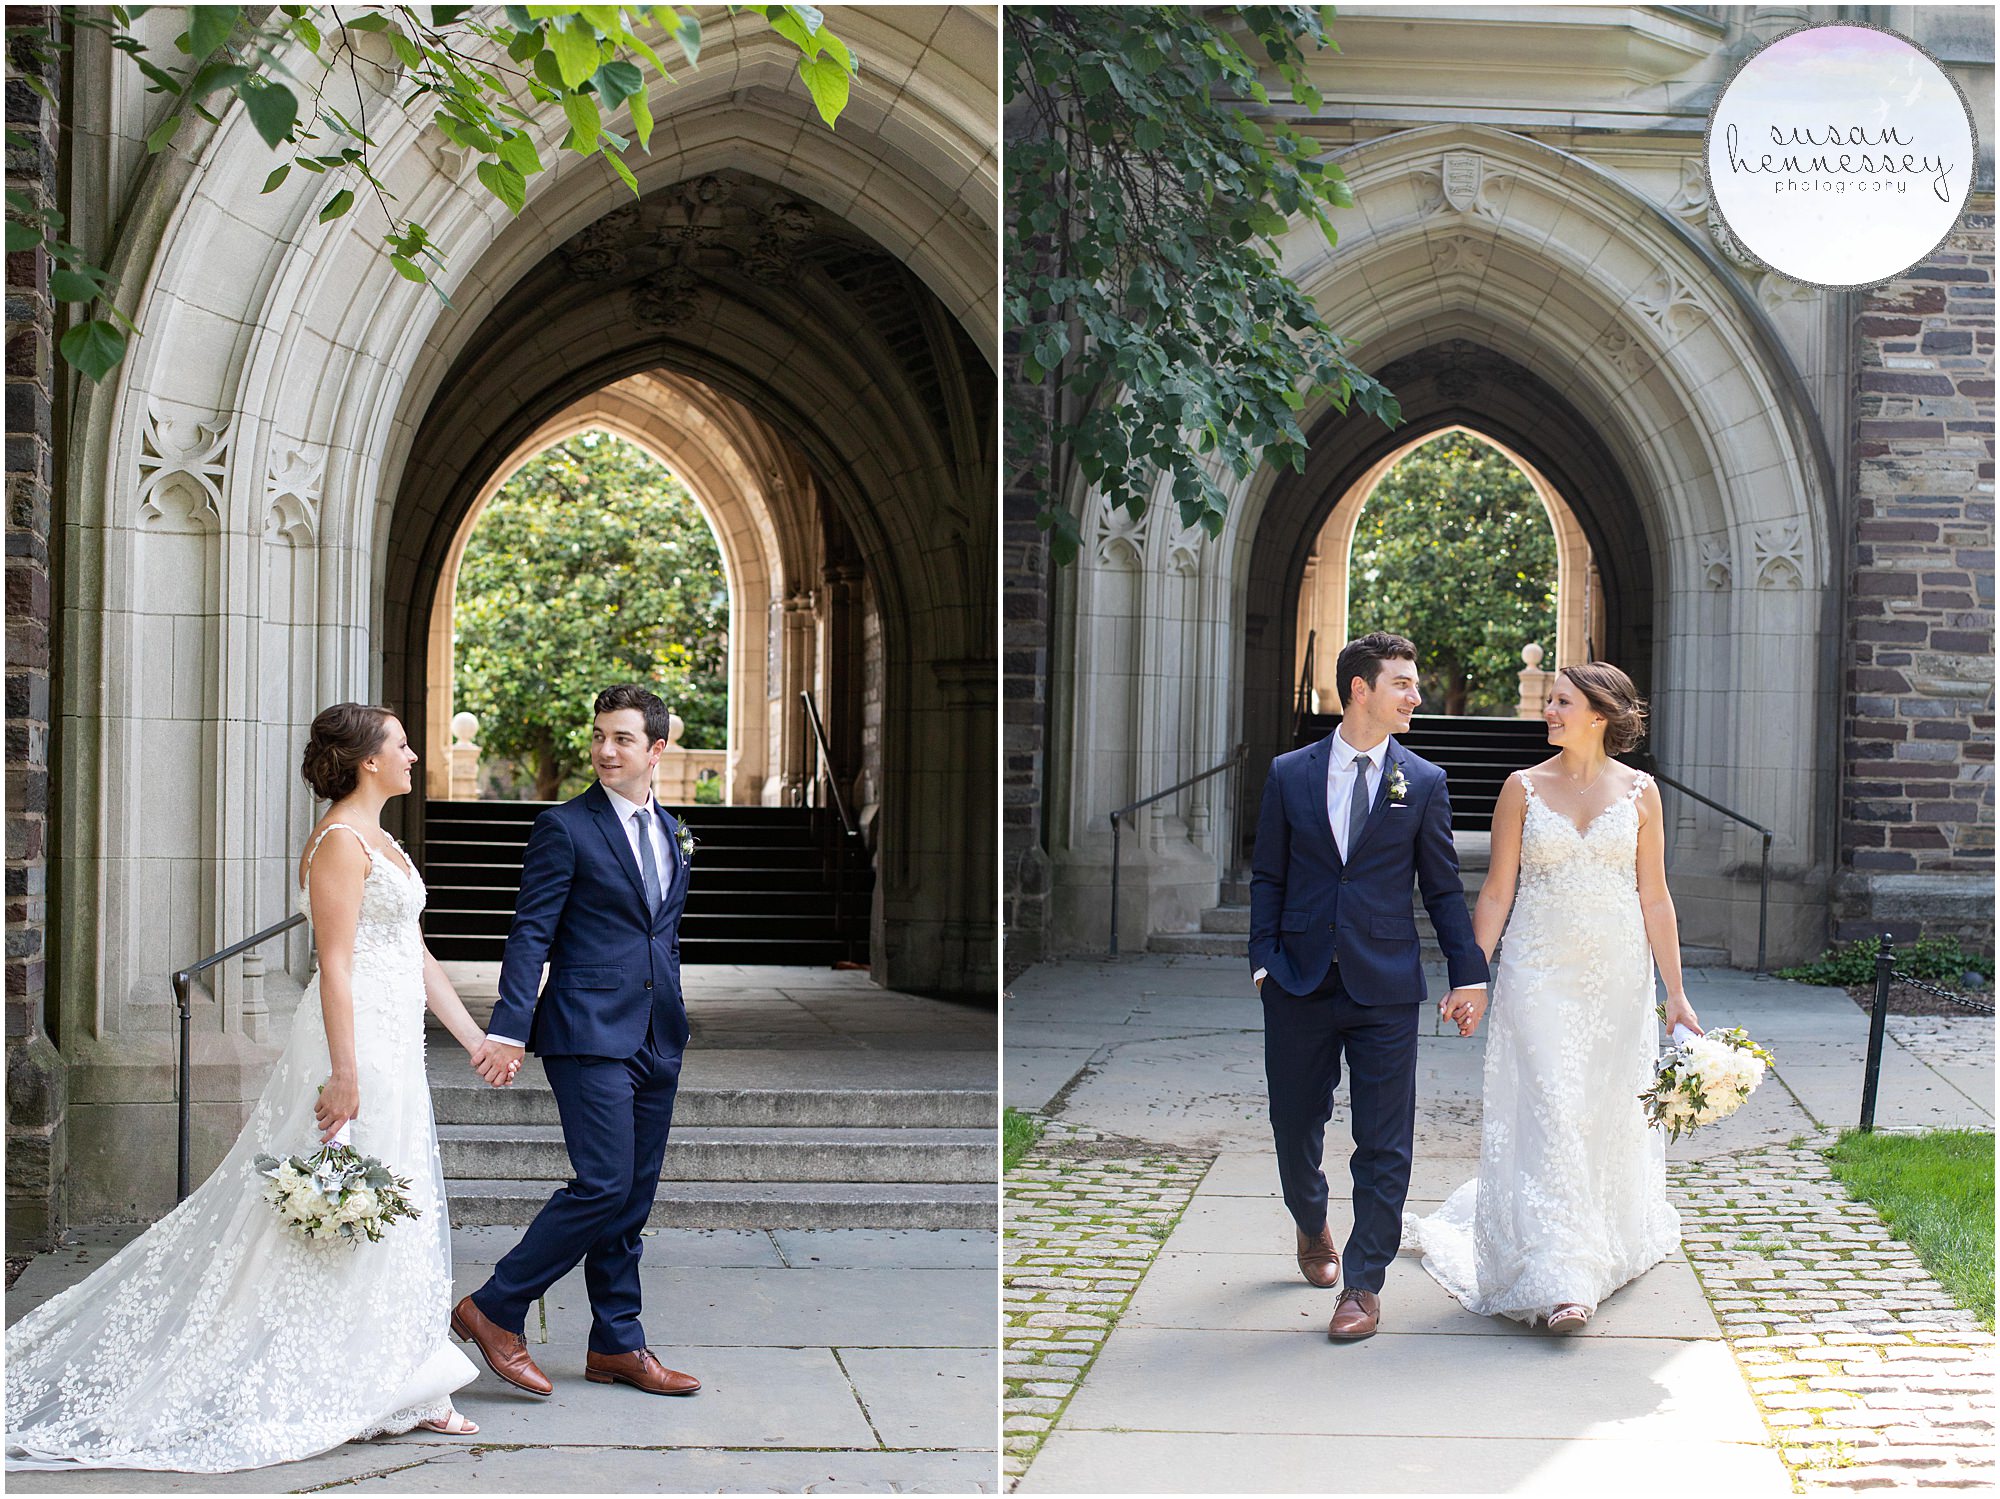 Bride and groom at Holder Hall on Princeton's campus